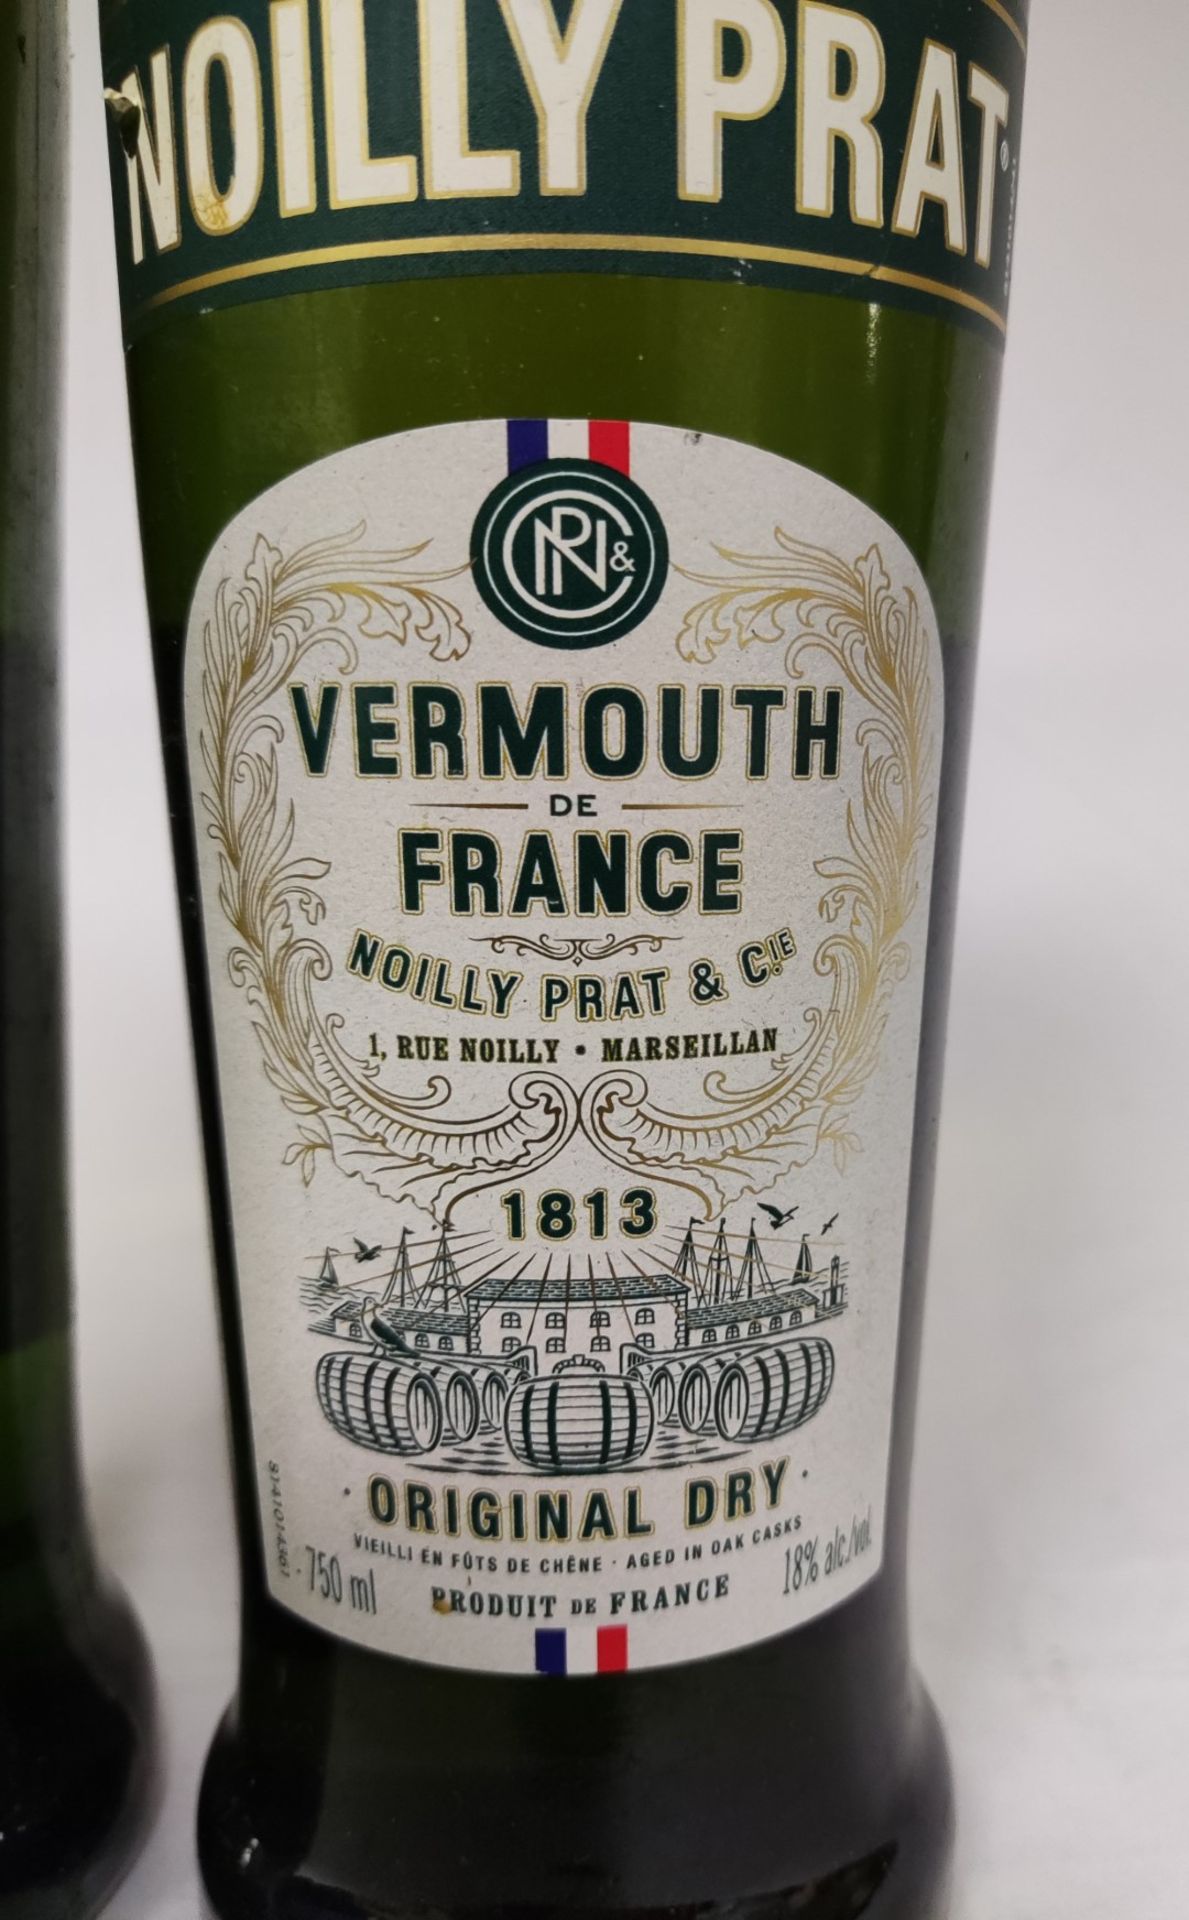 2 x Bottles of Noilly Prat Original Dry Vermouth - 18% - 750Ml Bootles - RRP £34 - Image 5 of 6